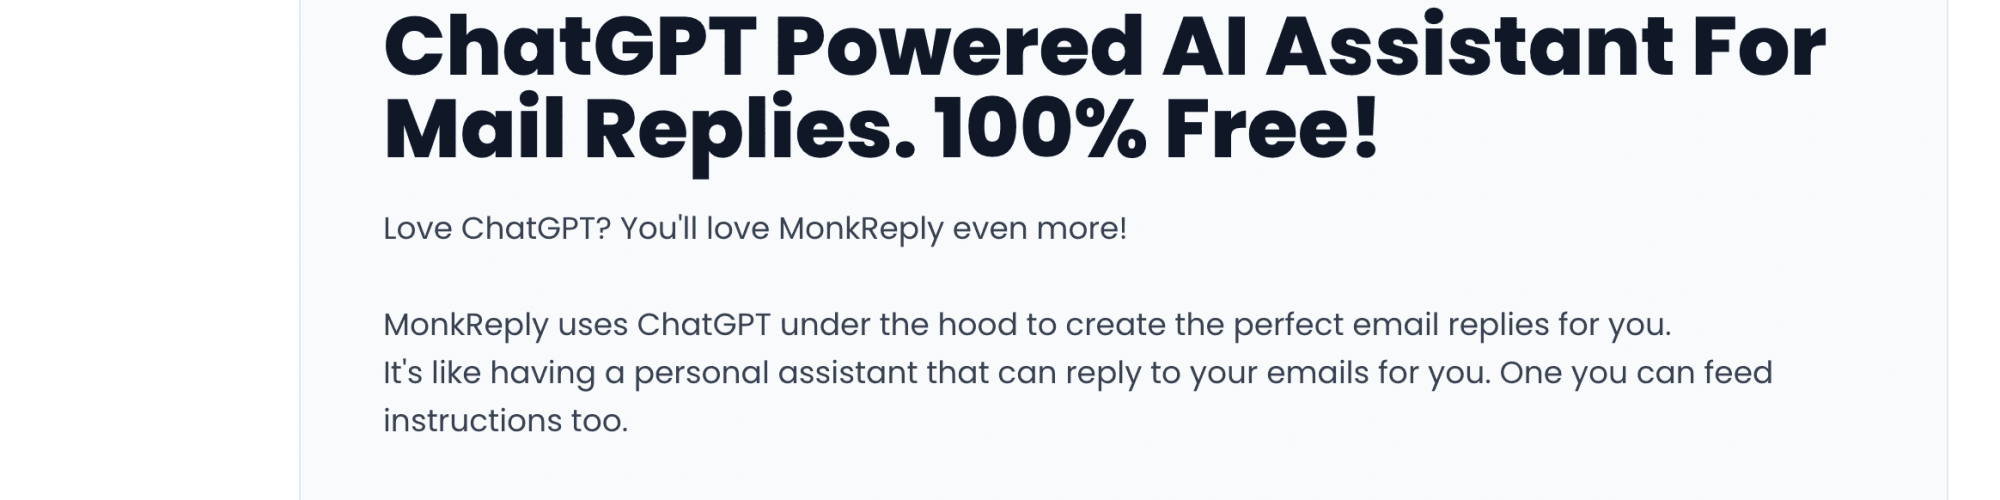 Perfect Emails by MonkReply - ChatGPT Powered Email Assistant